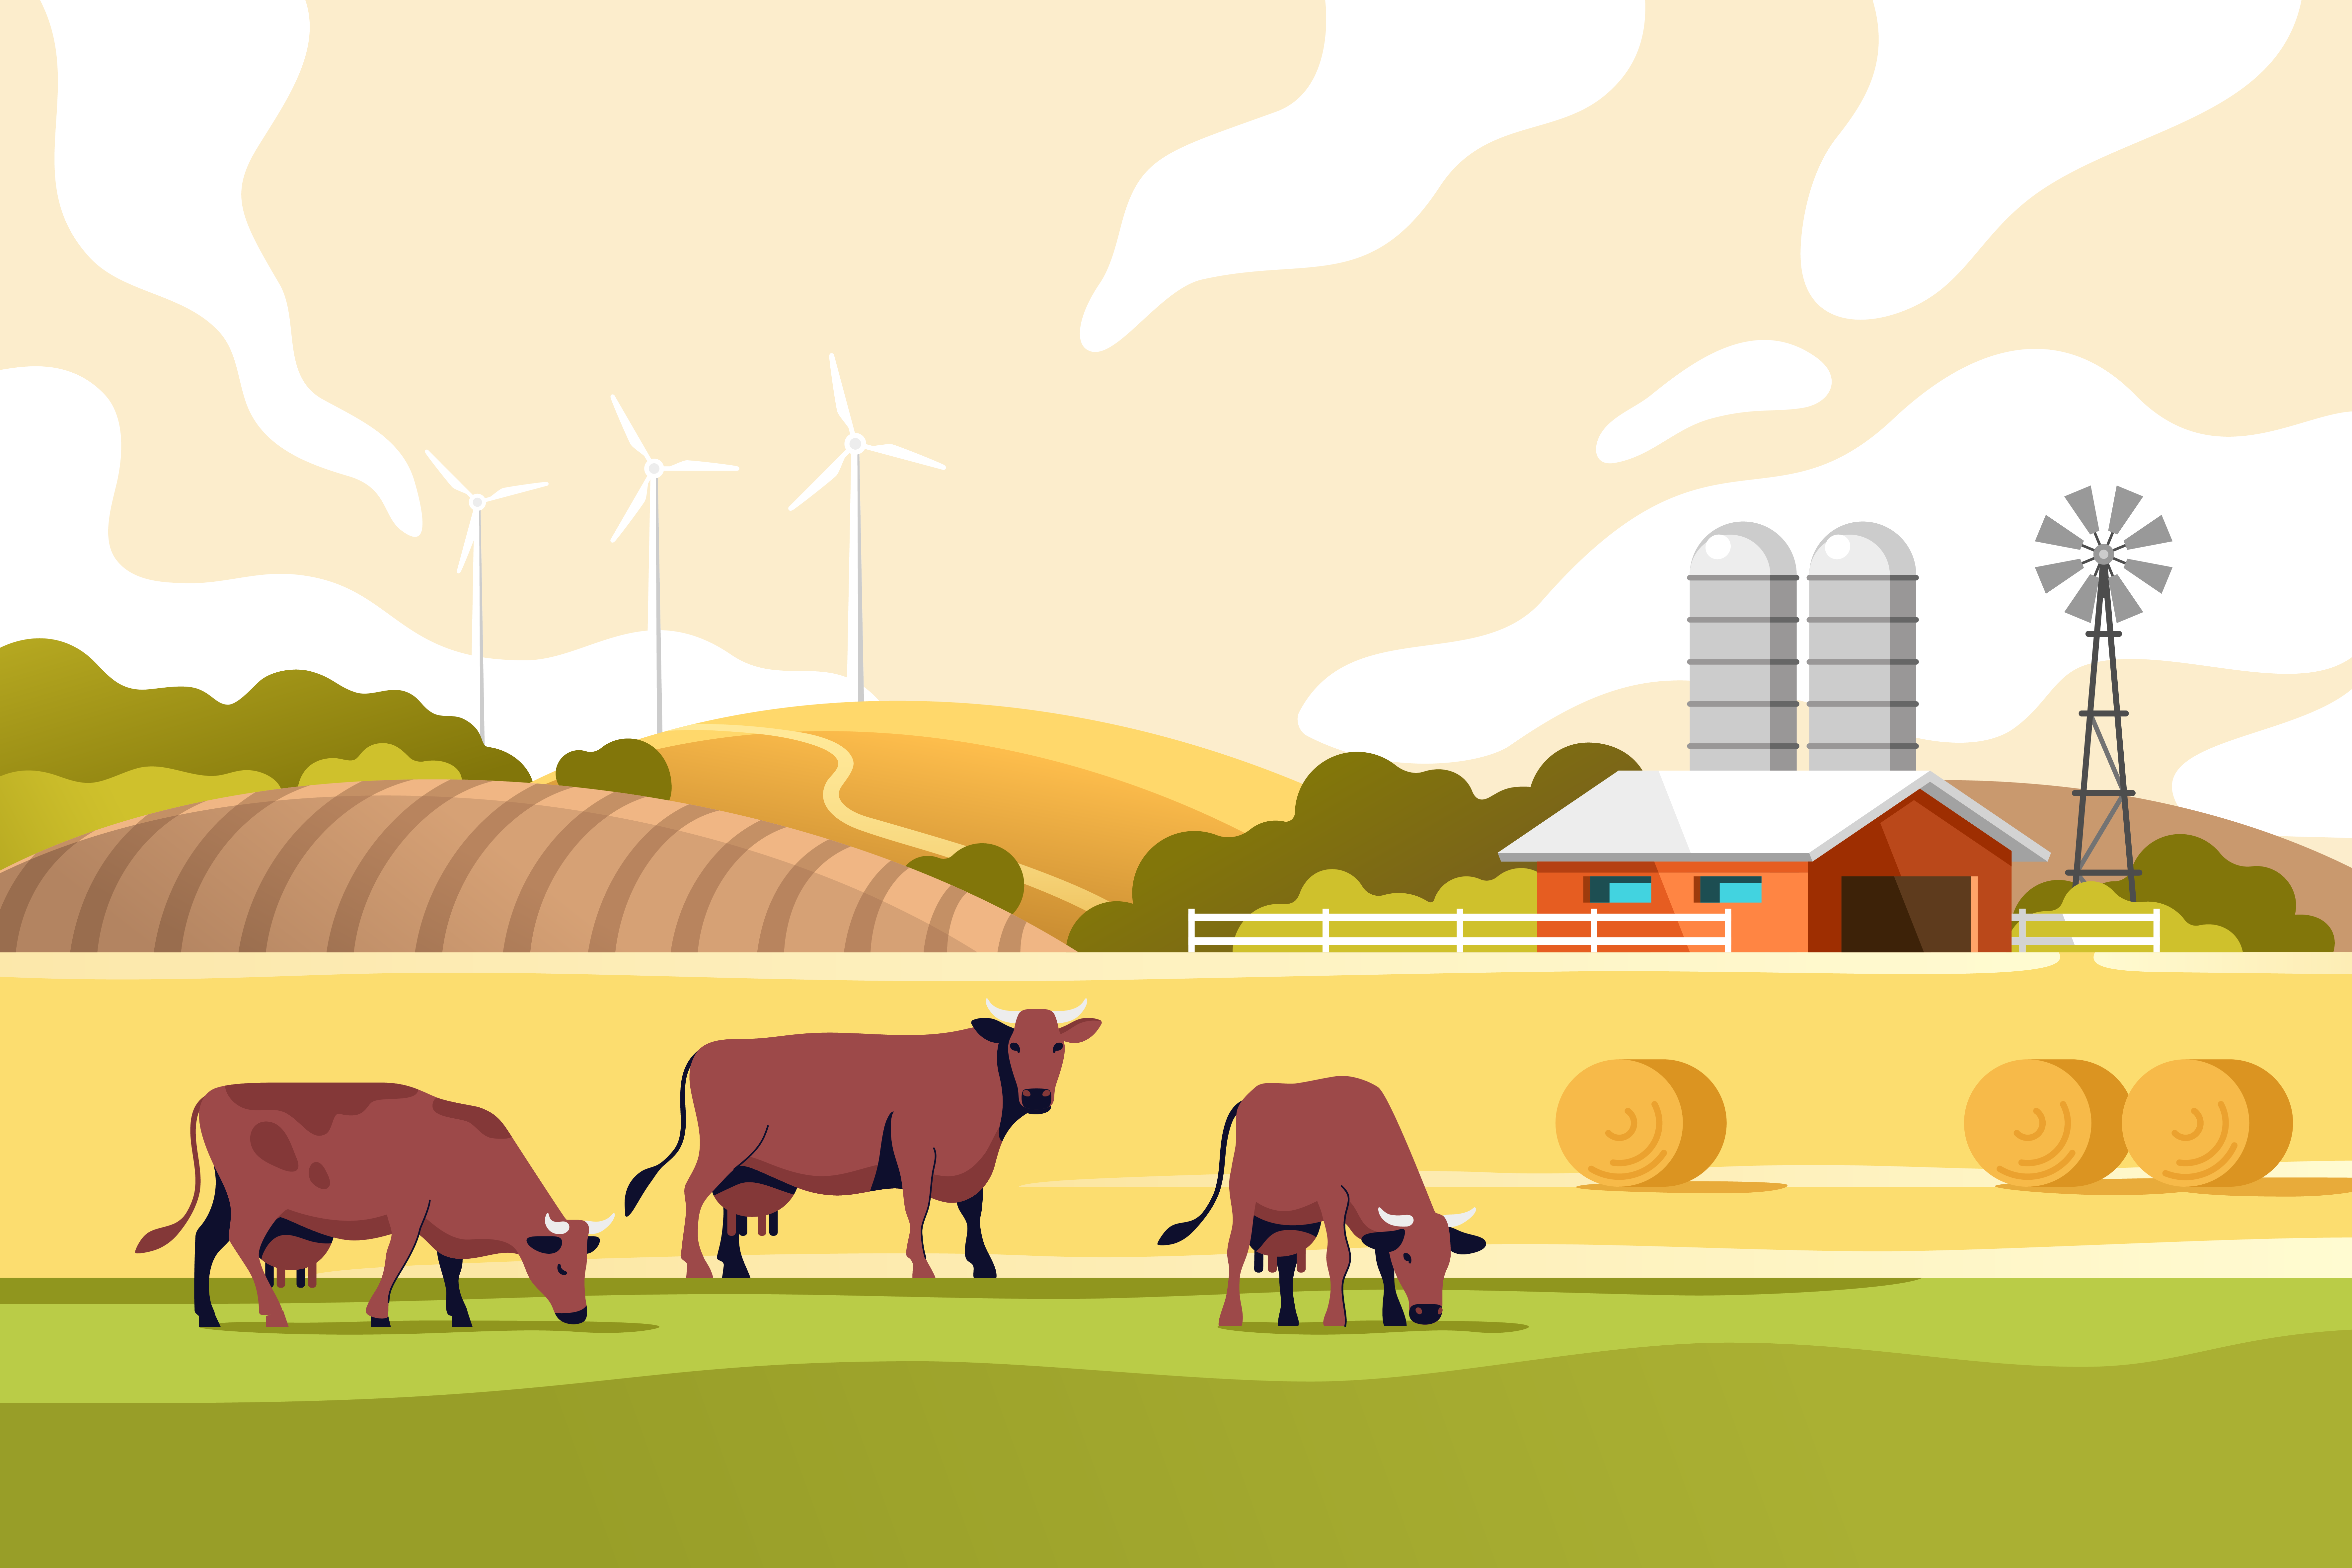 Drawing of cows in front of sustainable energy